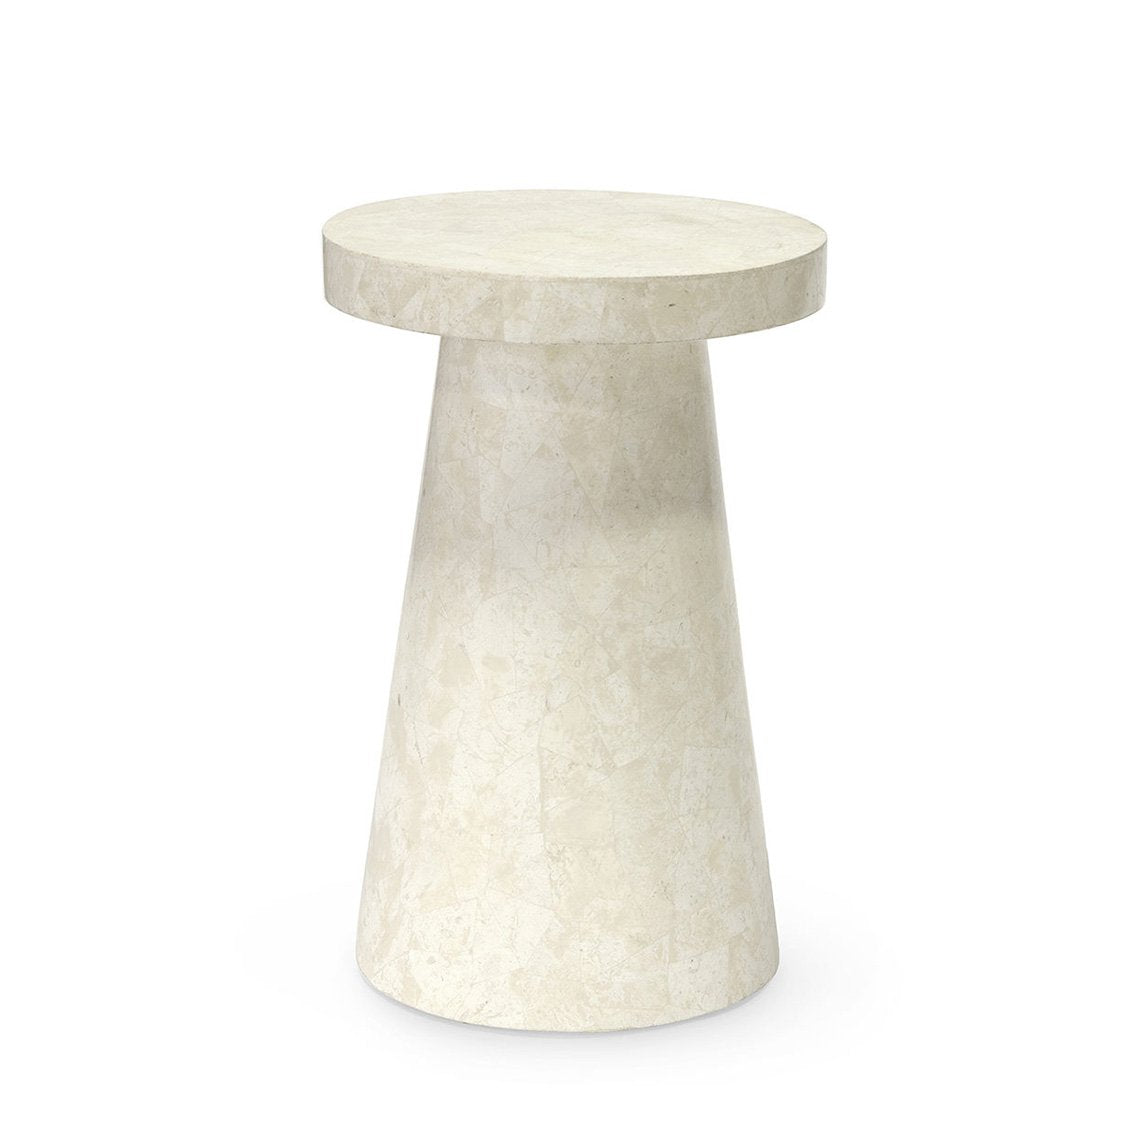 Foley Stone Od Side Table Tall, White